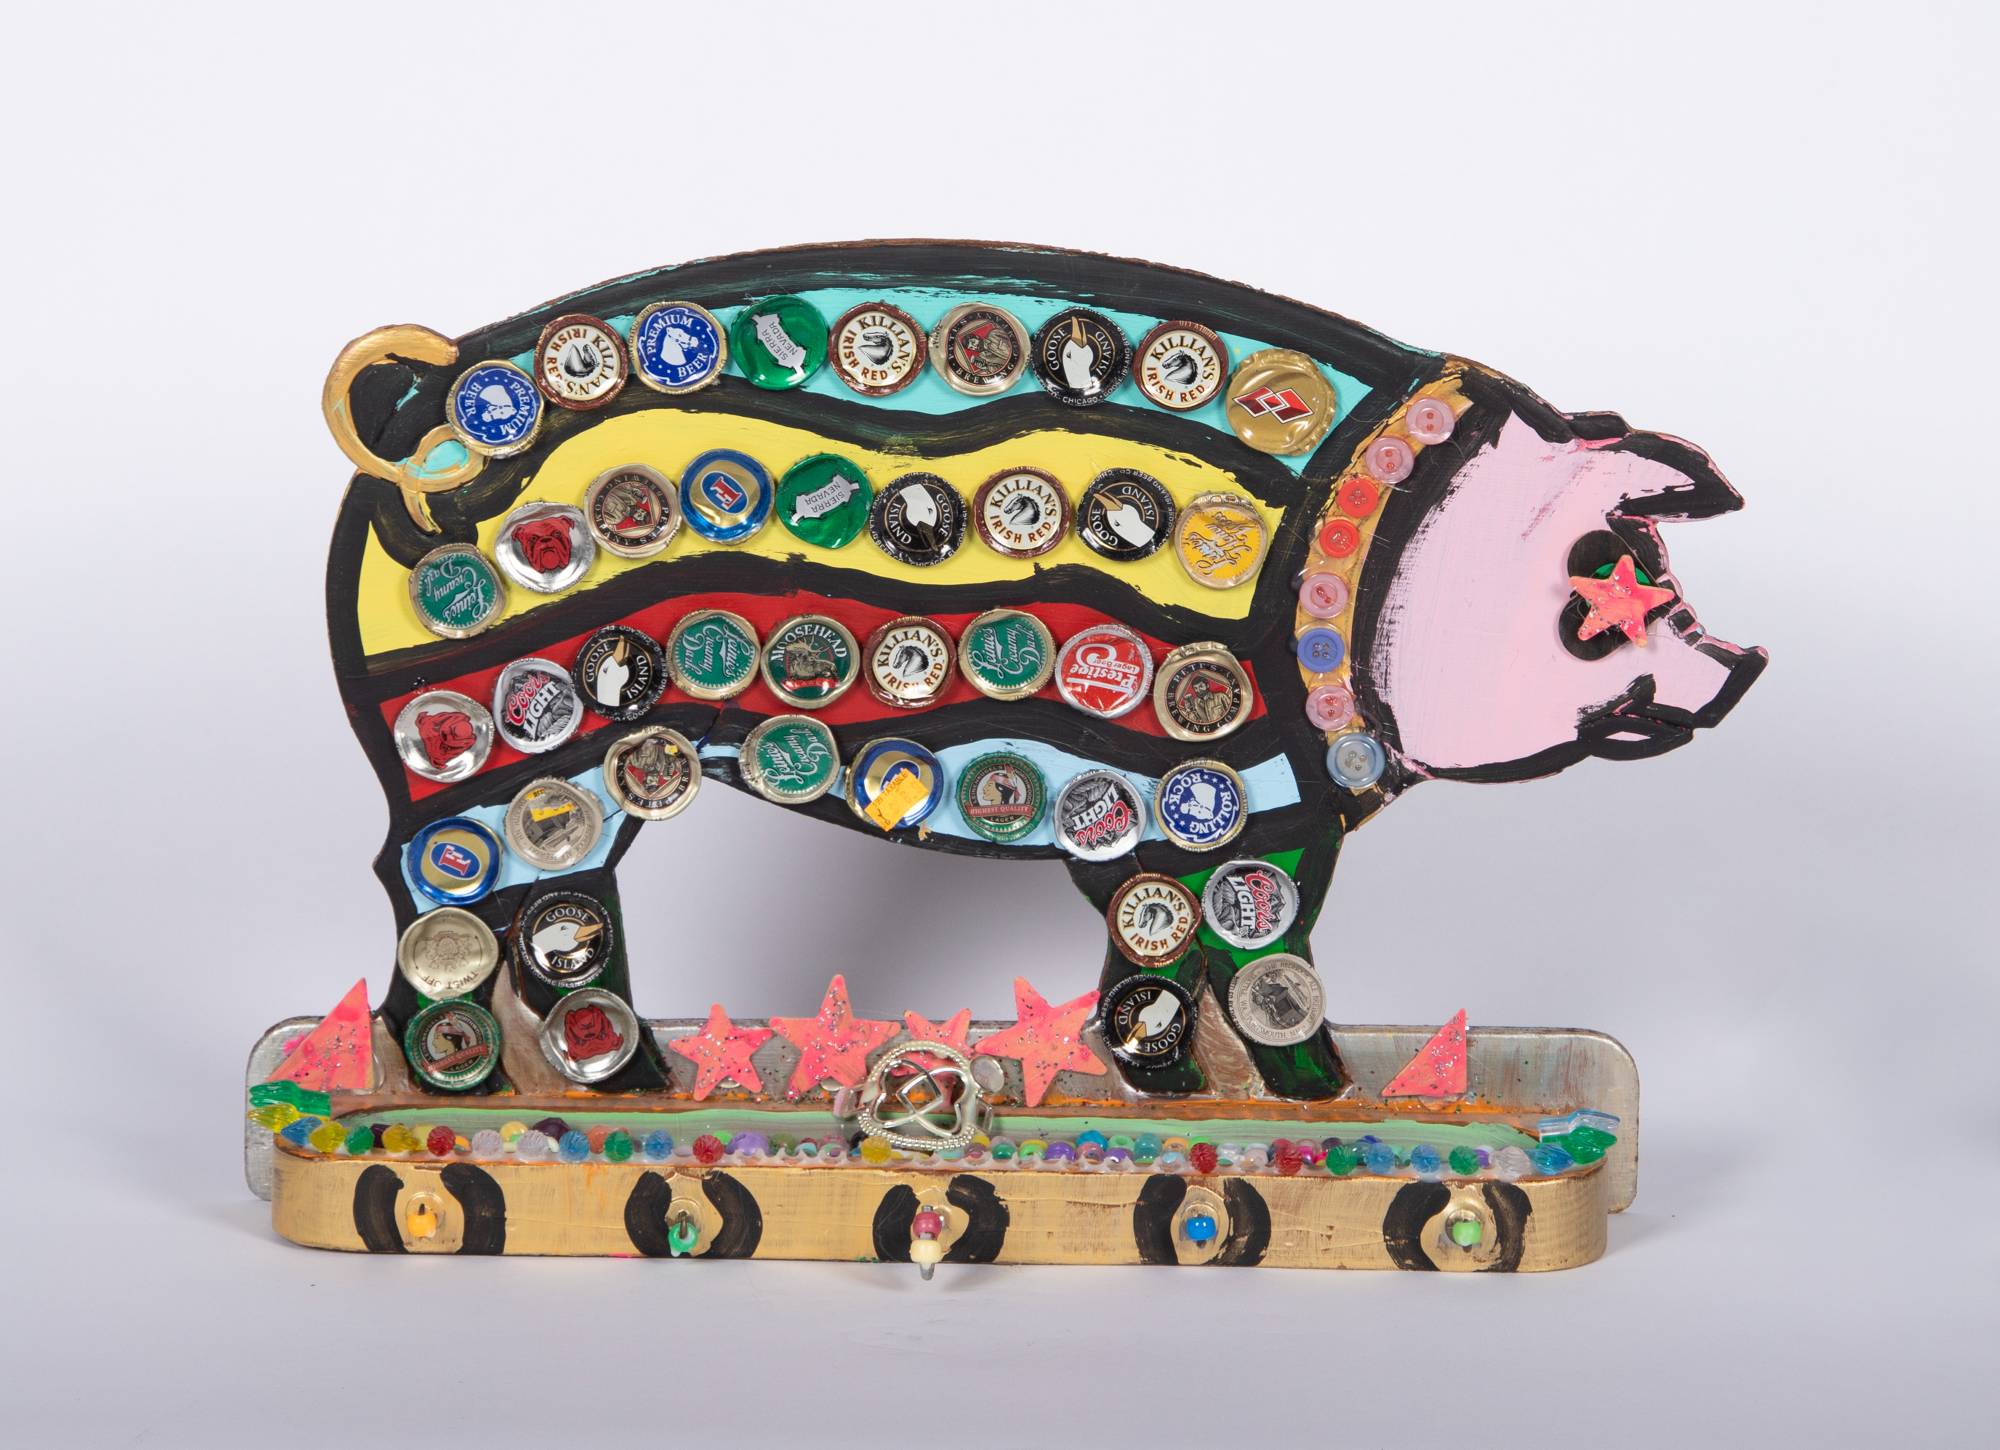 wooden pig colorfully painted and covered in bottle caps